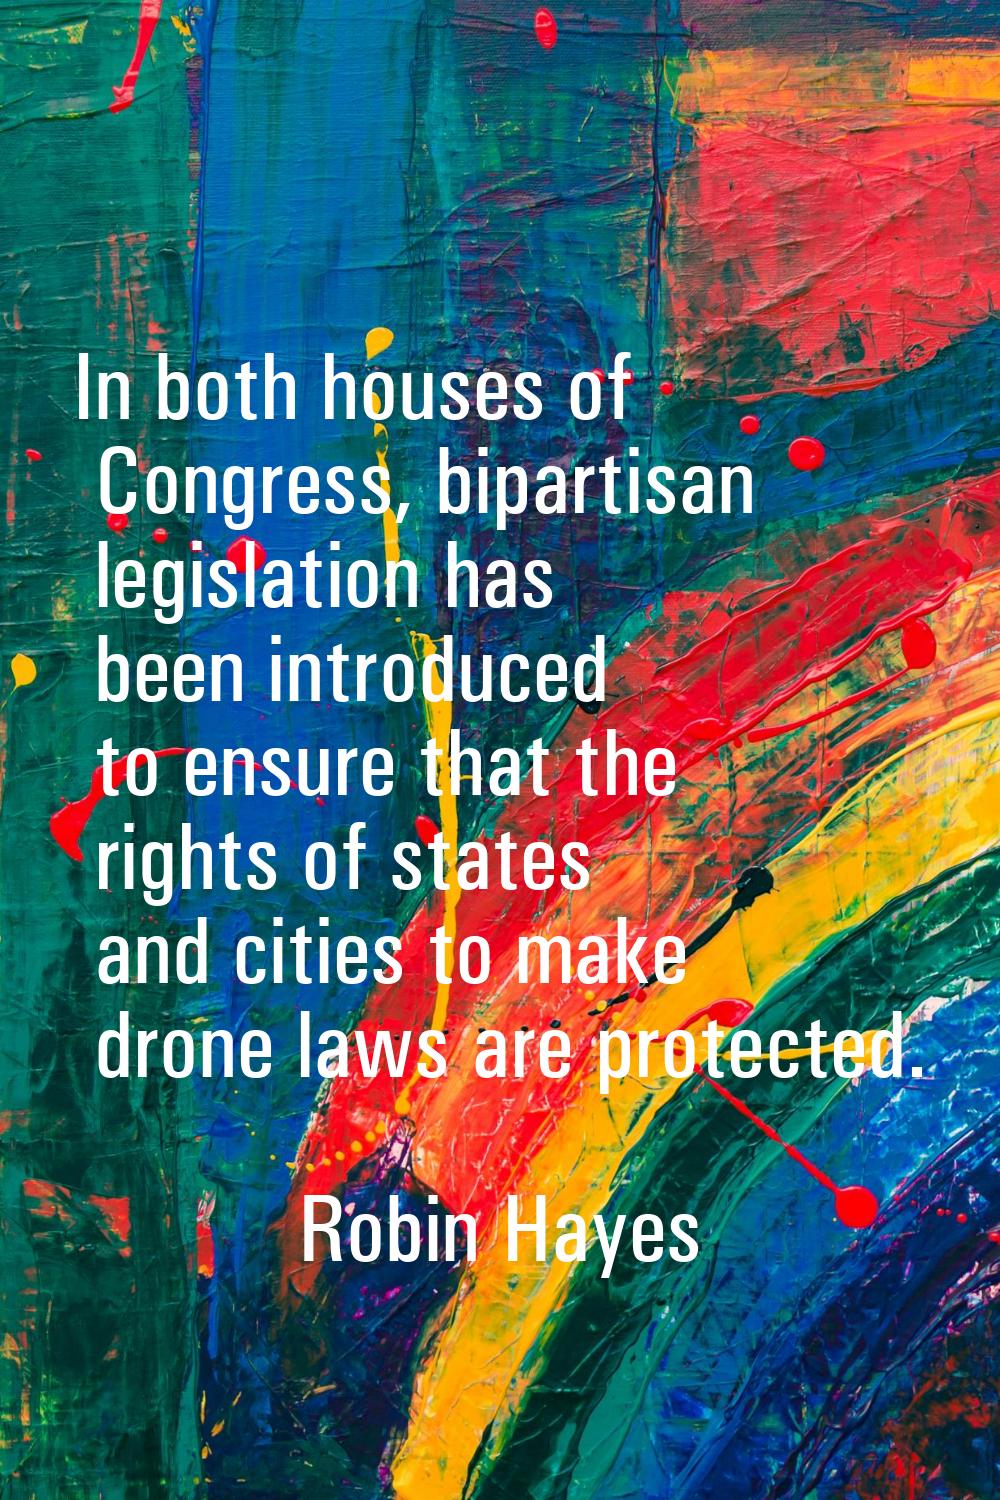 In both houses of Congress, bipartisan legislation has been introduced to ensure that the rights of